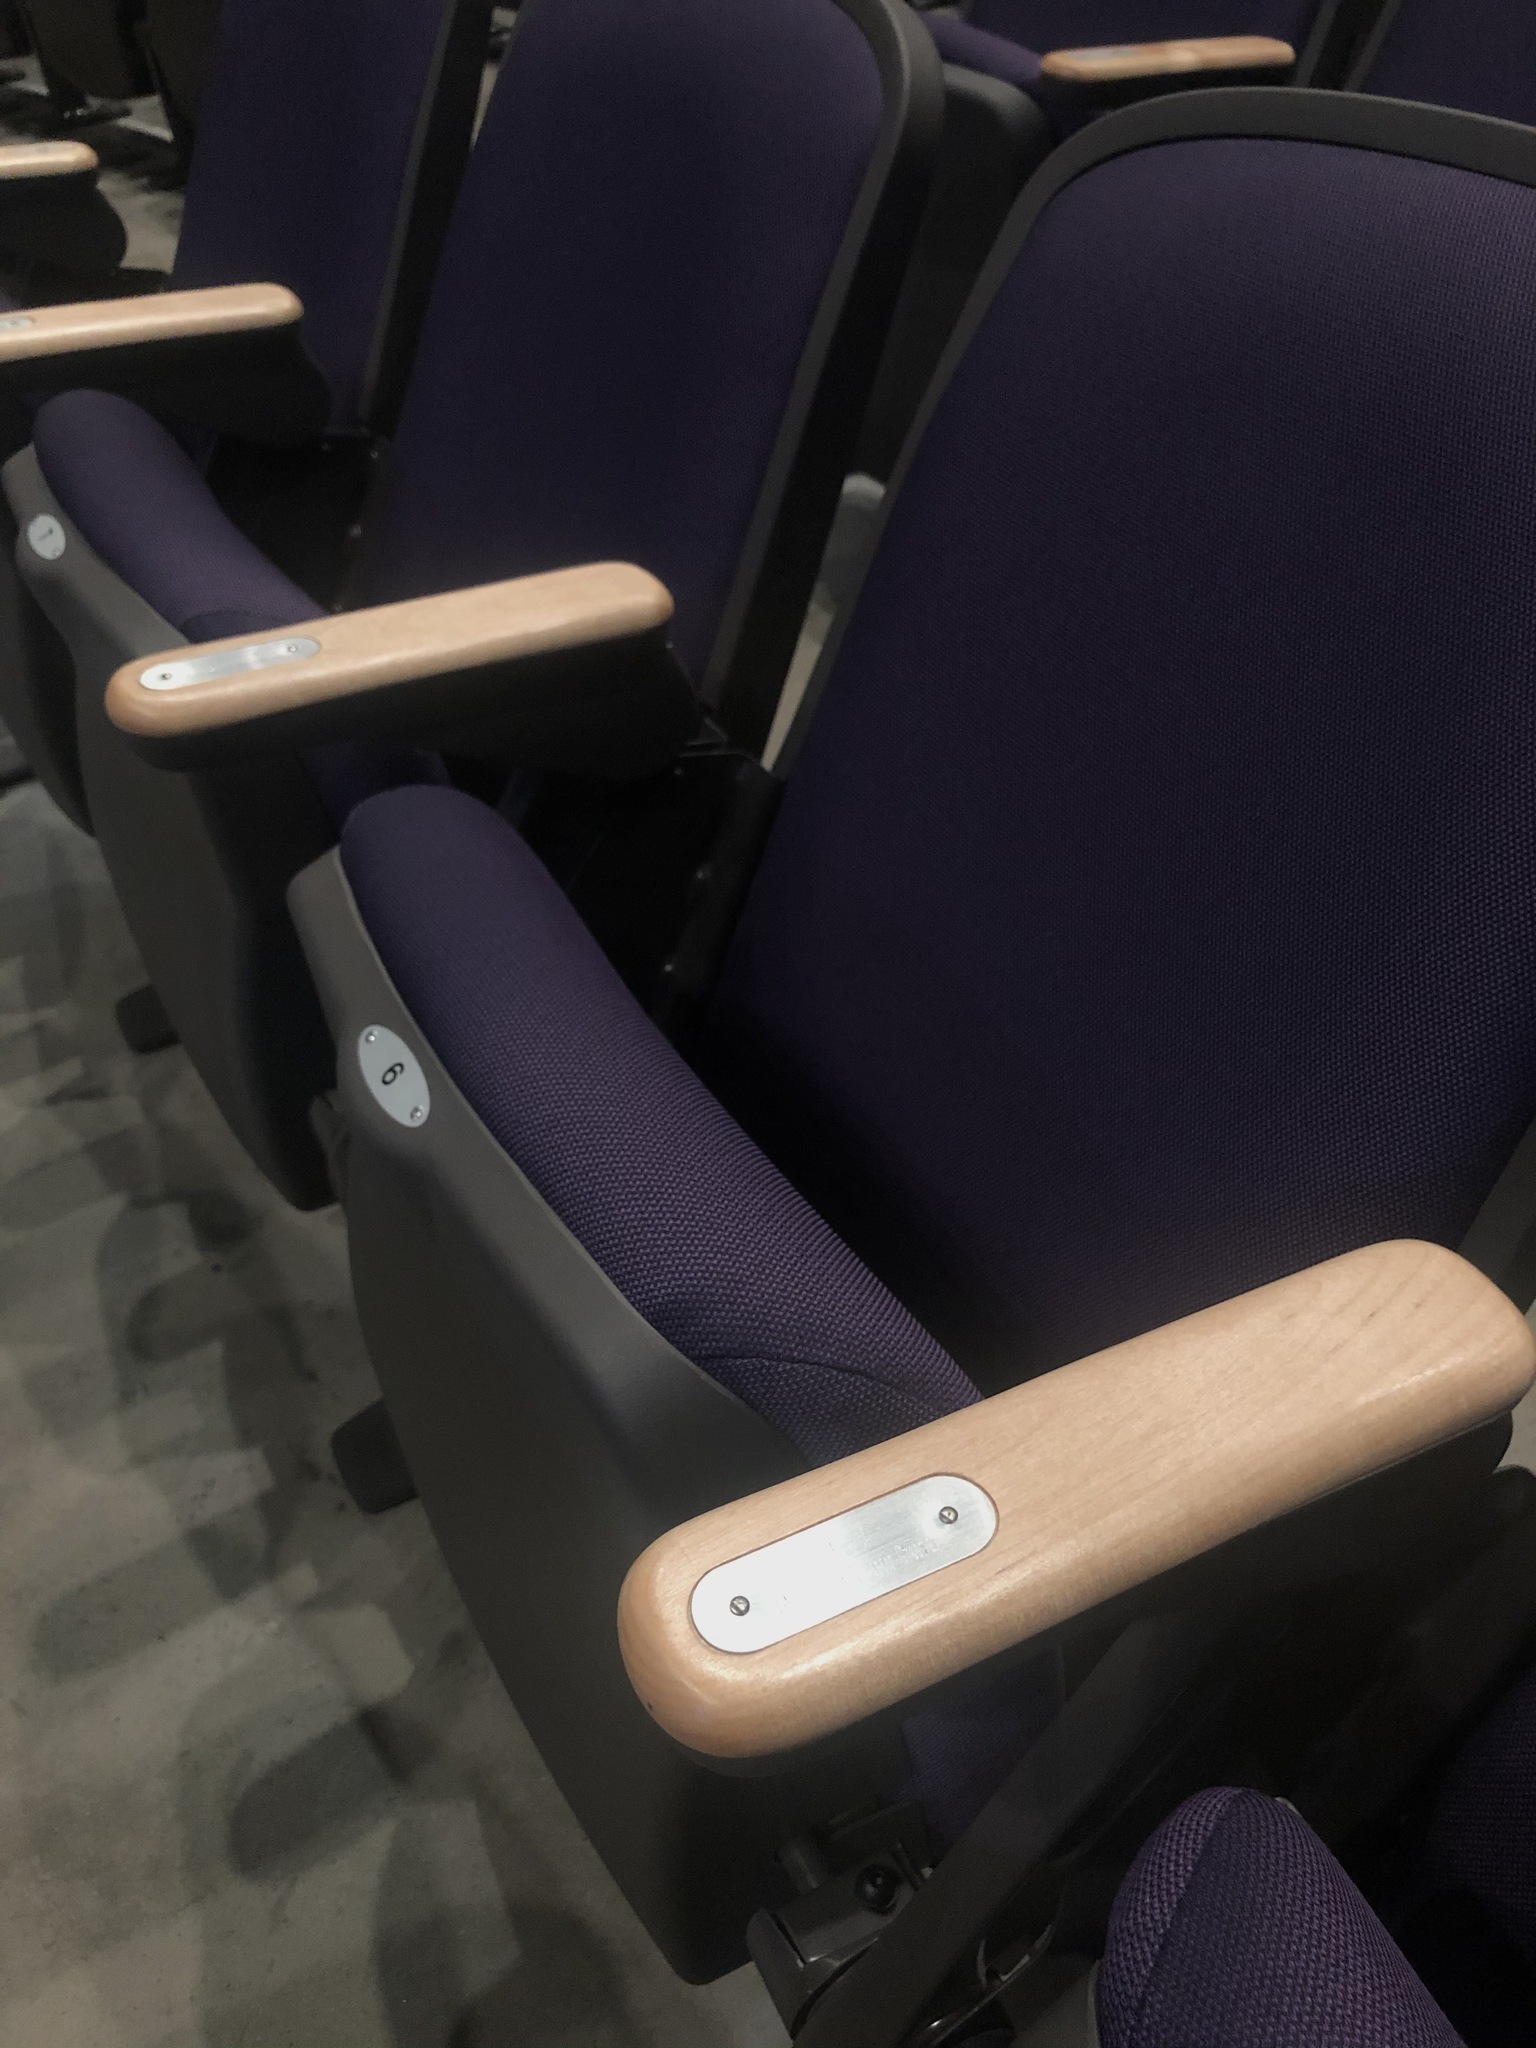 New seats and nameplates, installed in 2021.